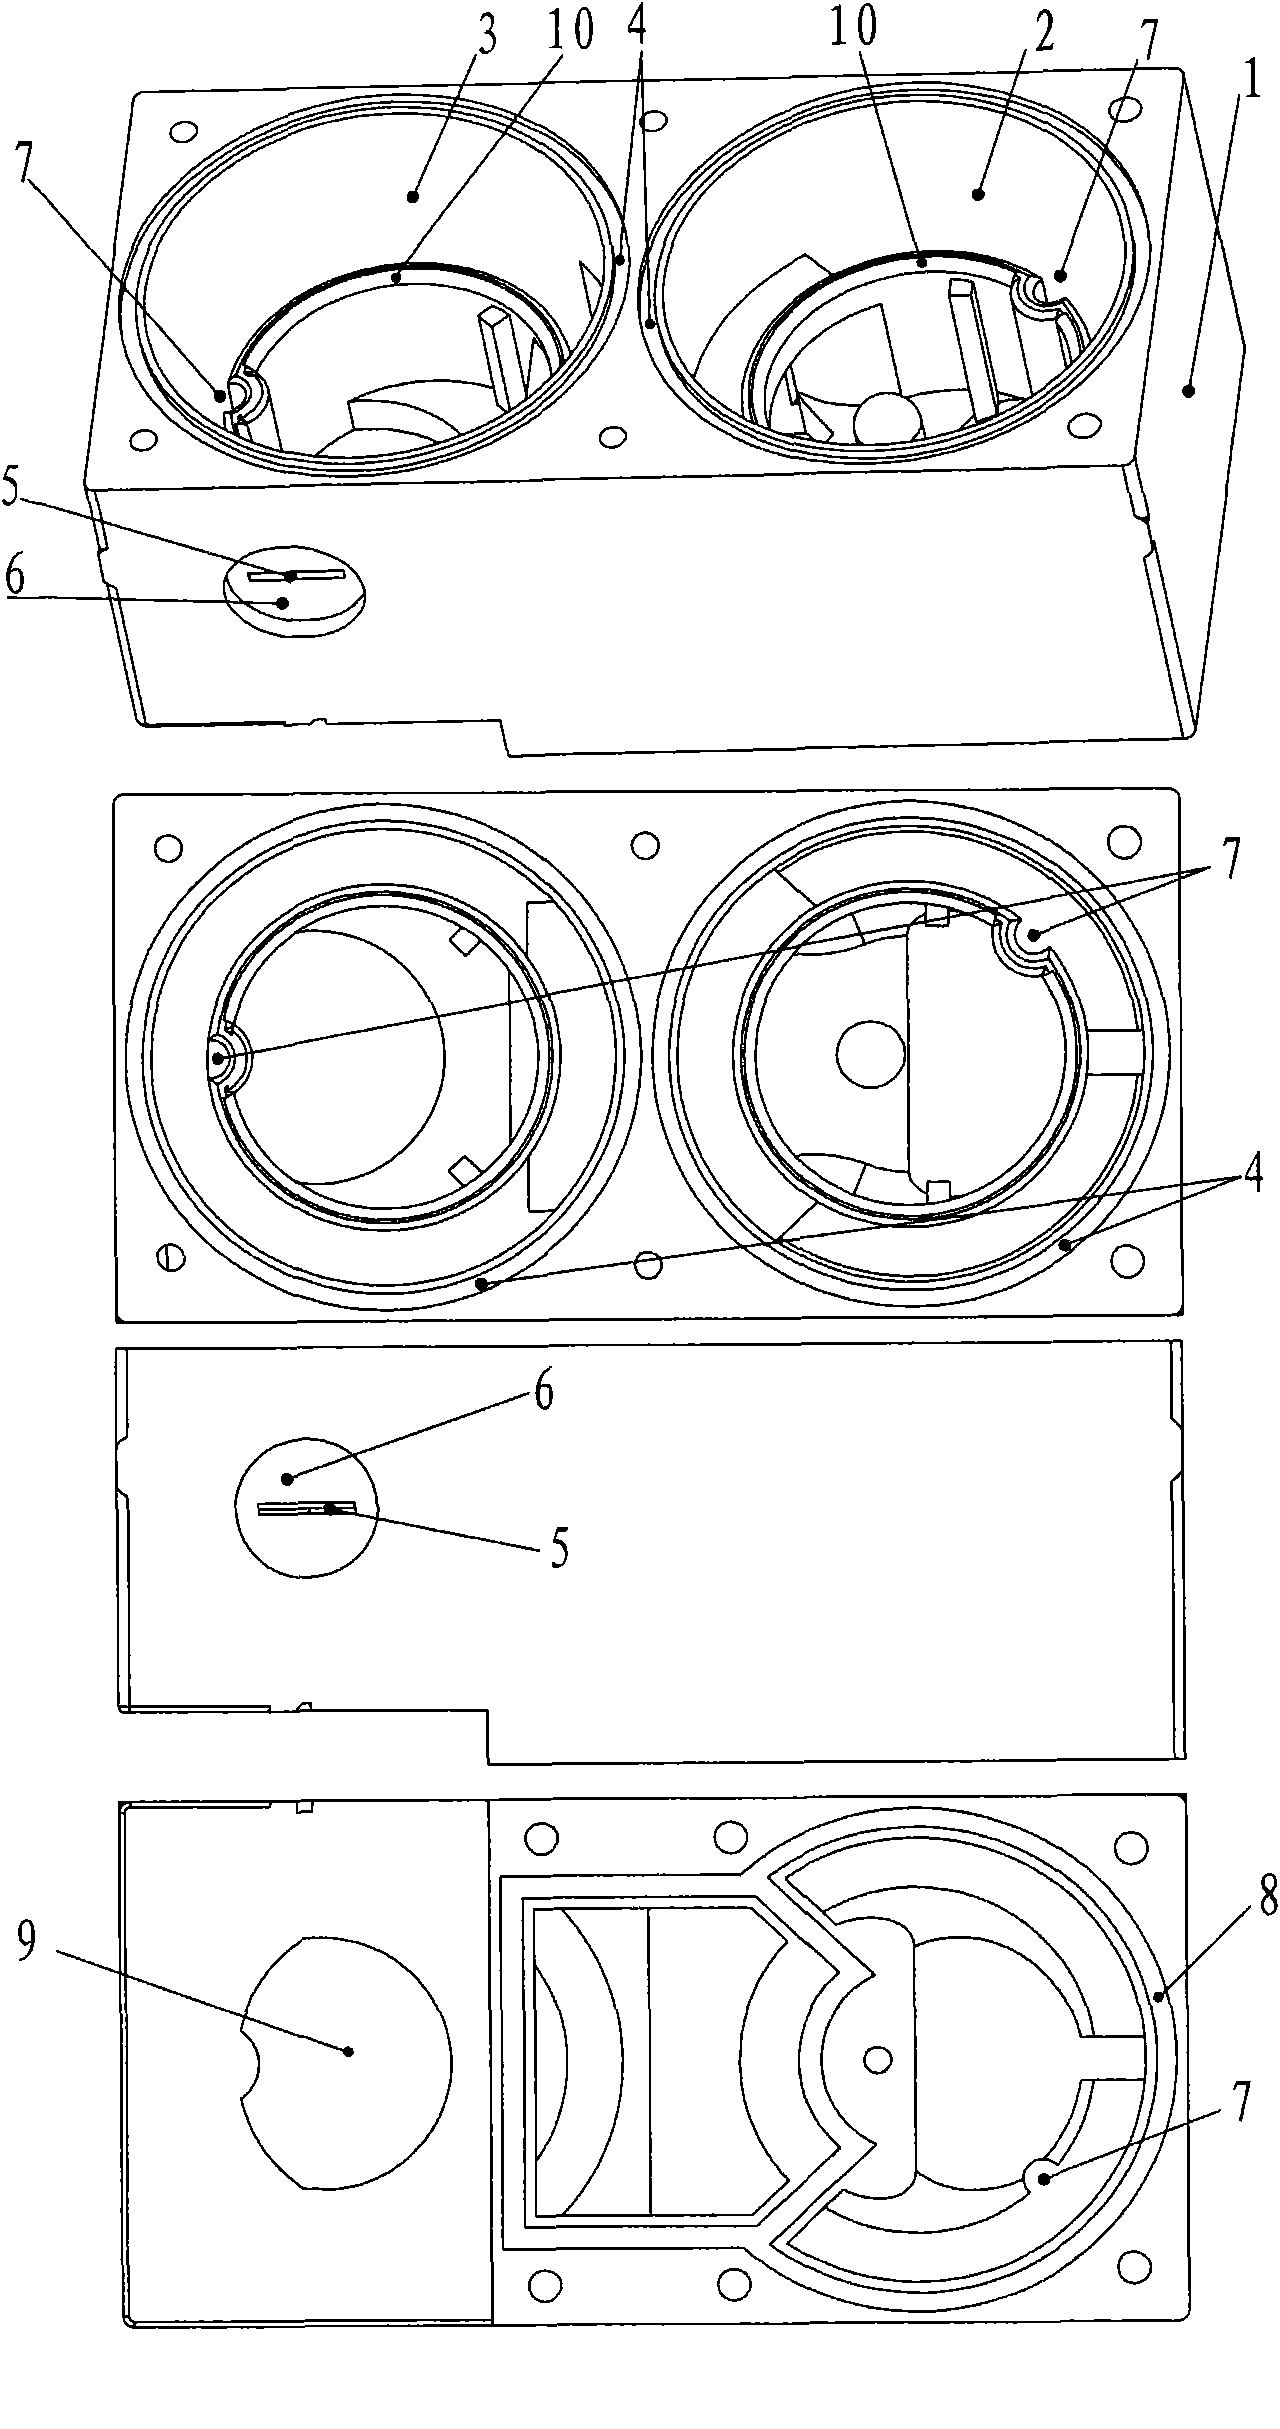 Self-closed water-saving device, method and toilet stool